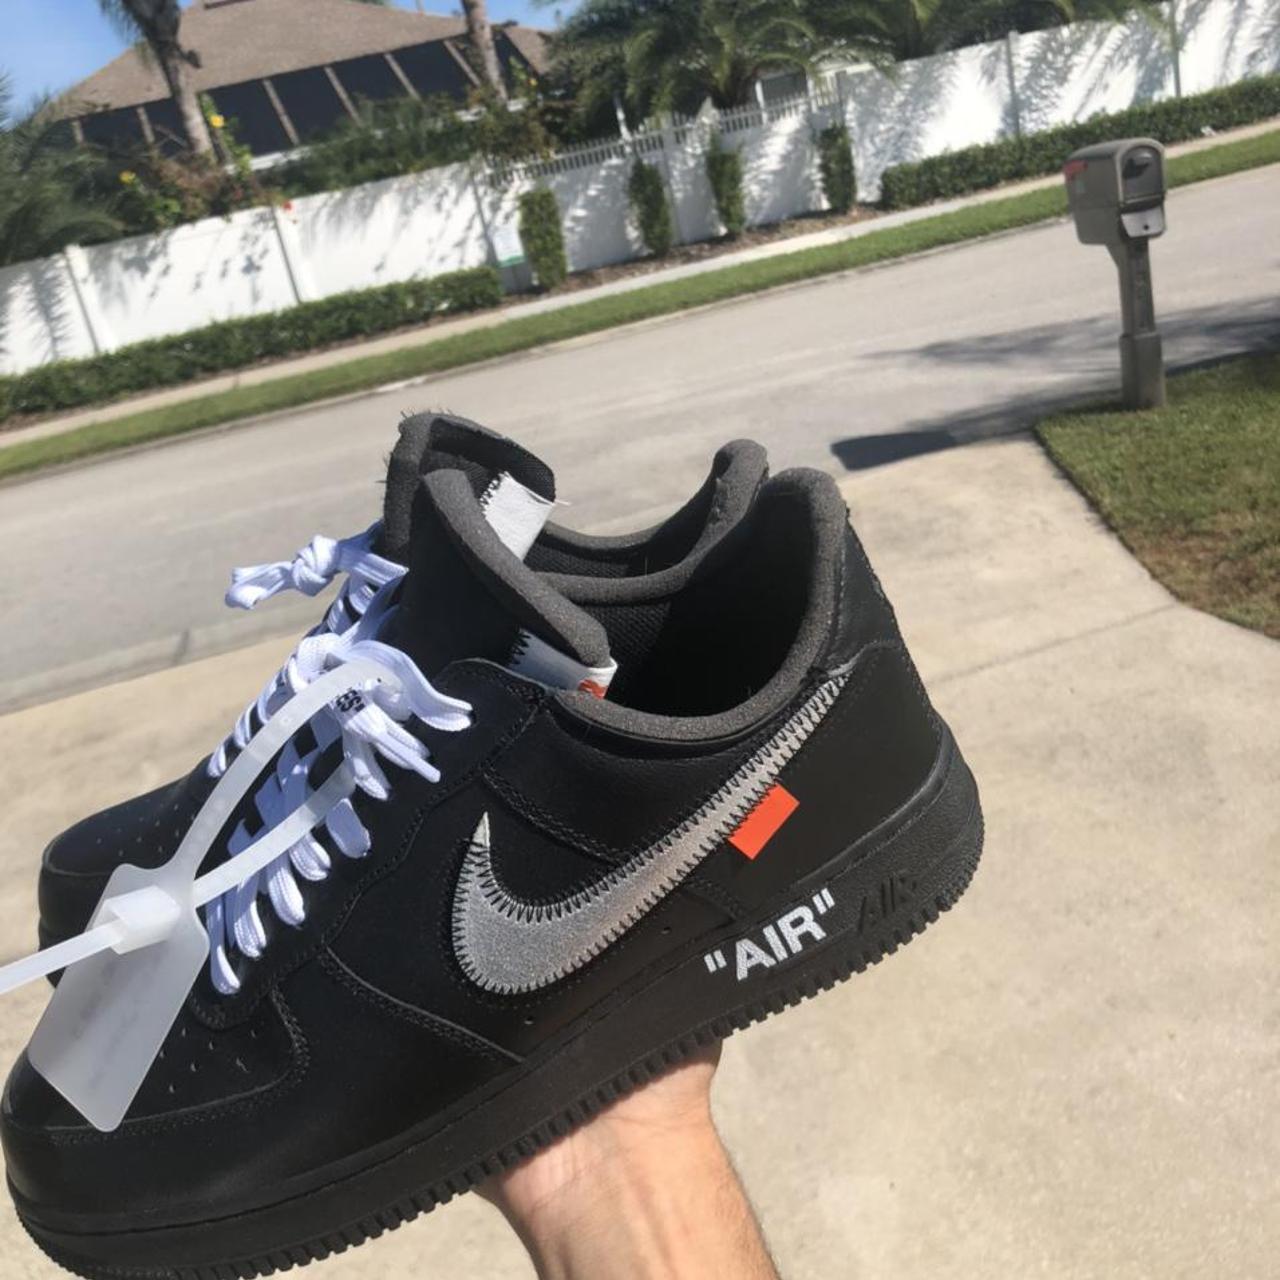 MoMA x Nike Air Force 1 - Where to Buy